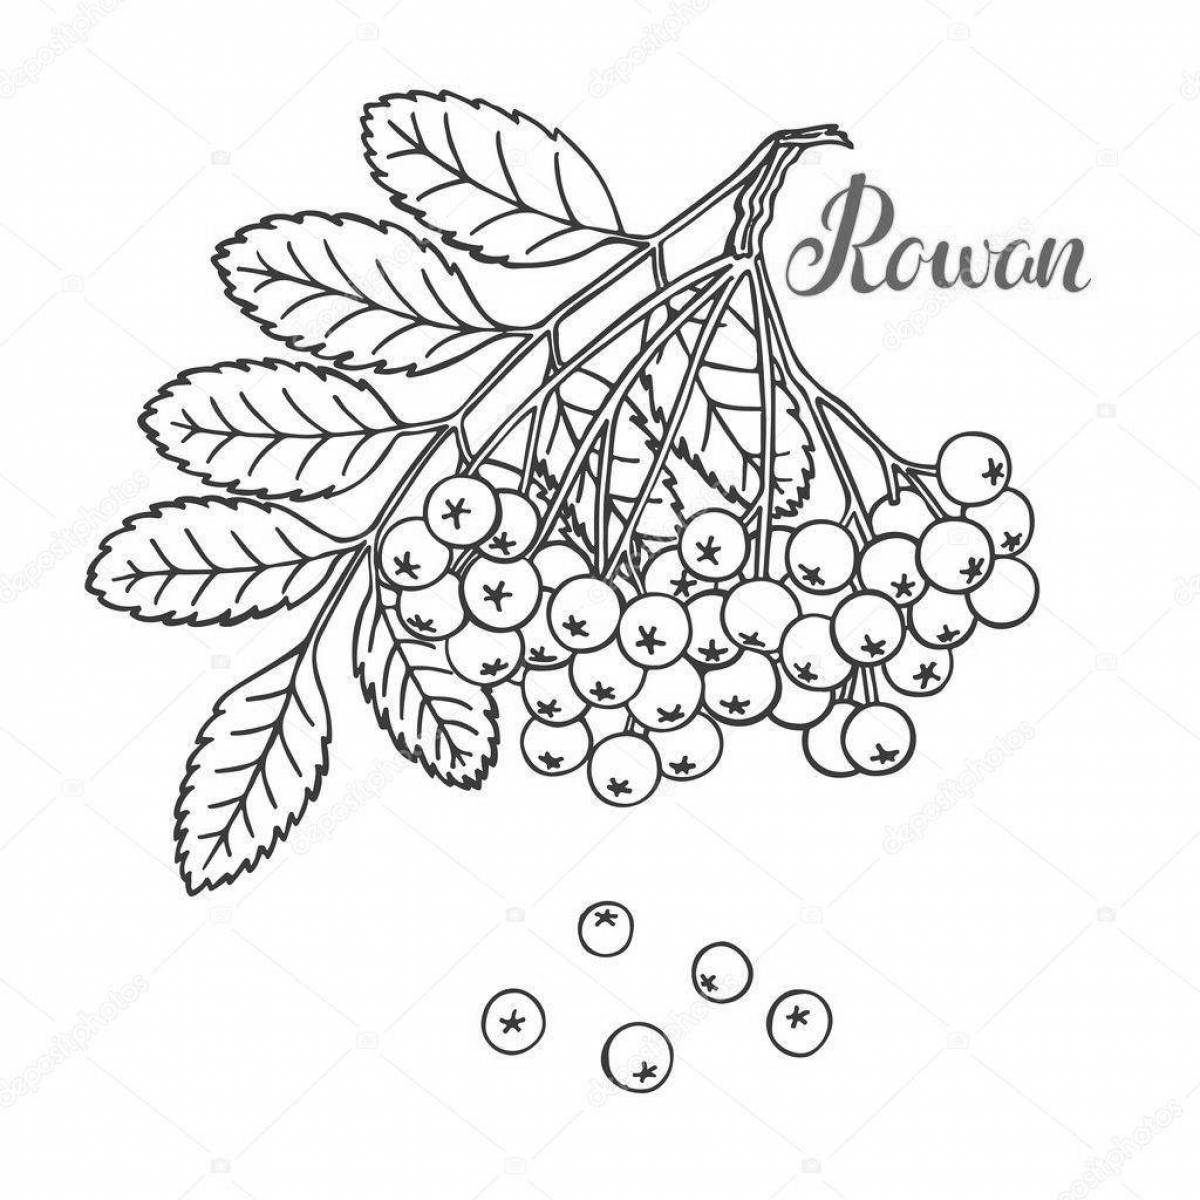 Gorgeous rowan branch coloring book for kids